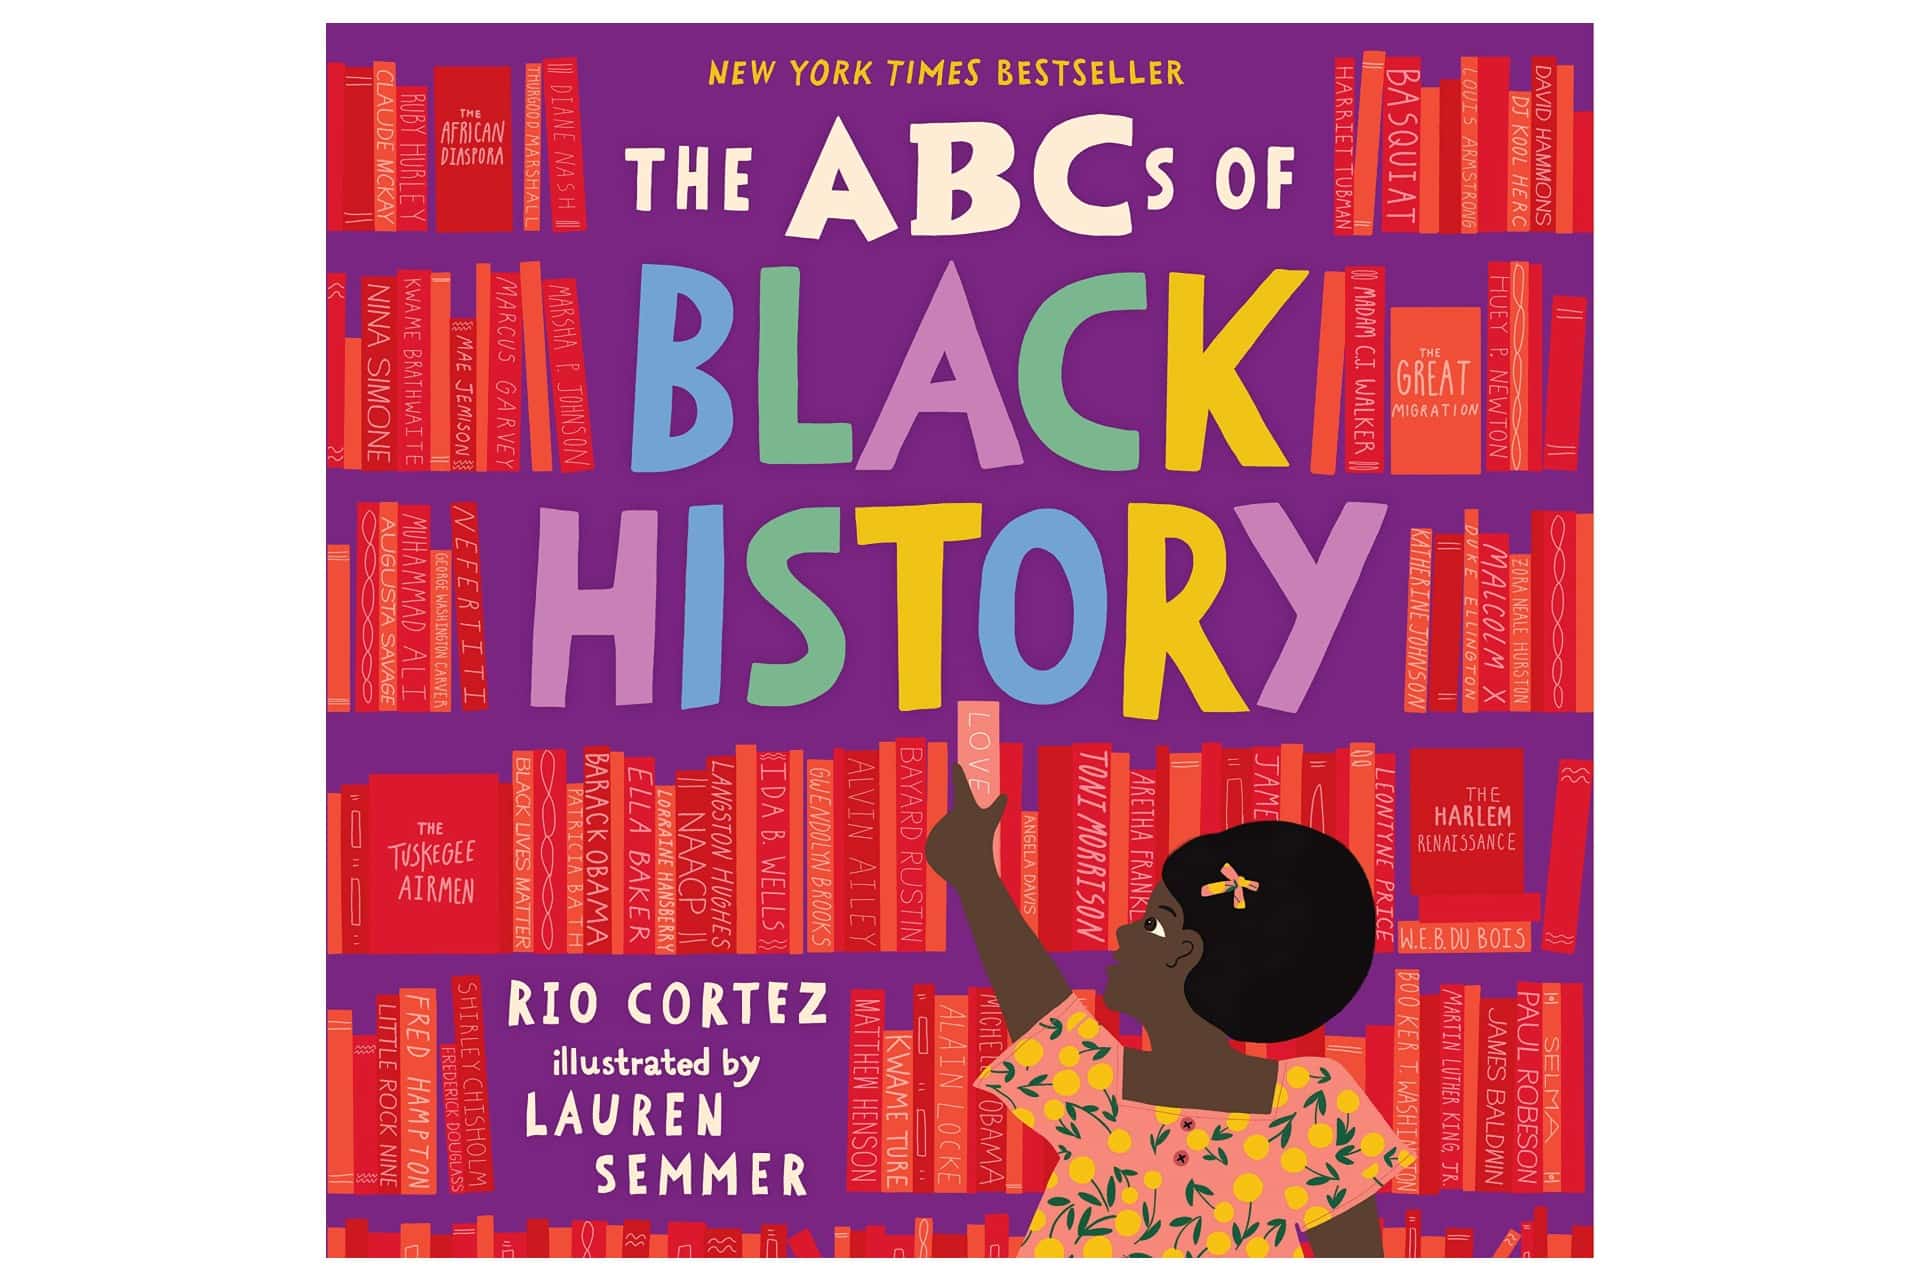 Book cover called The ABCs of Black History with a little Black girl reaching for a book in the library